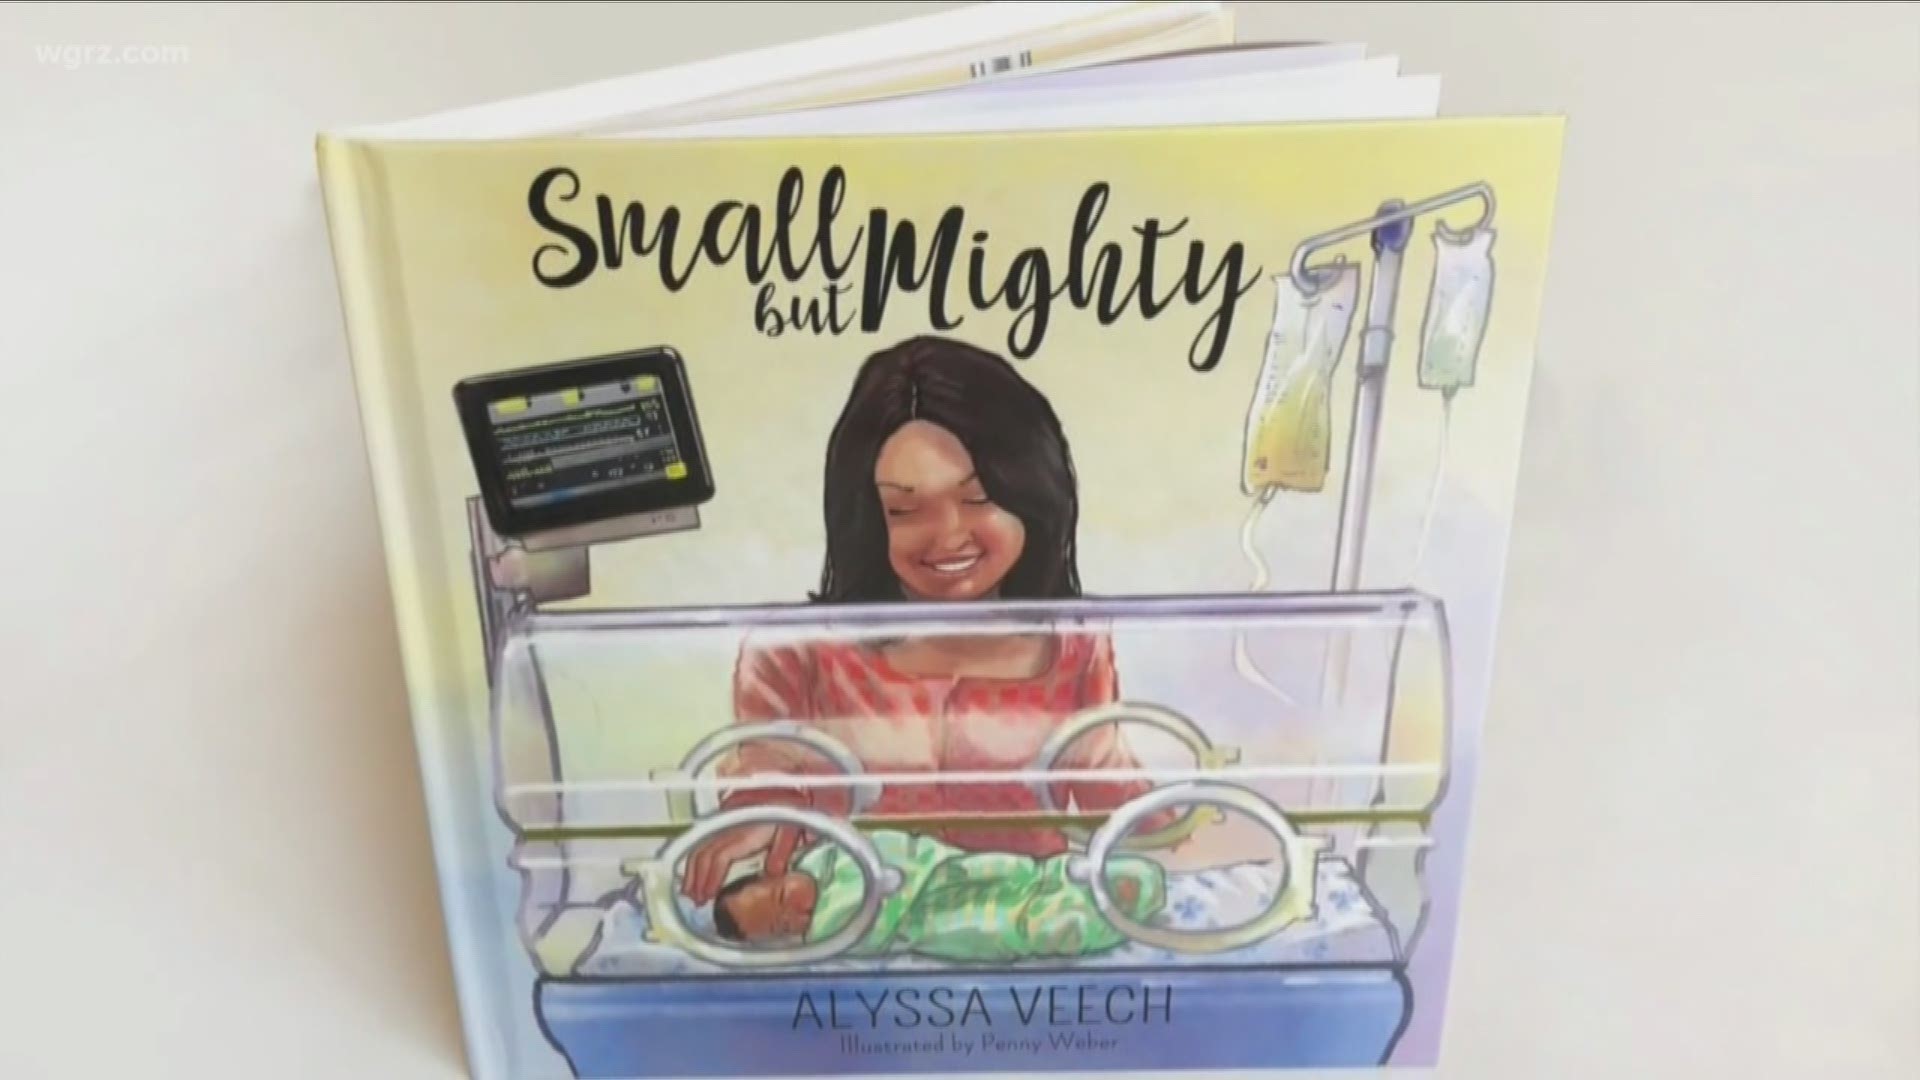 Sister's of Charity Hospital nurse, Alyssa Veech, wrote "Small But Mighty" to help parents on the emotional journey of having a preemie in the NICU.